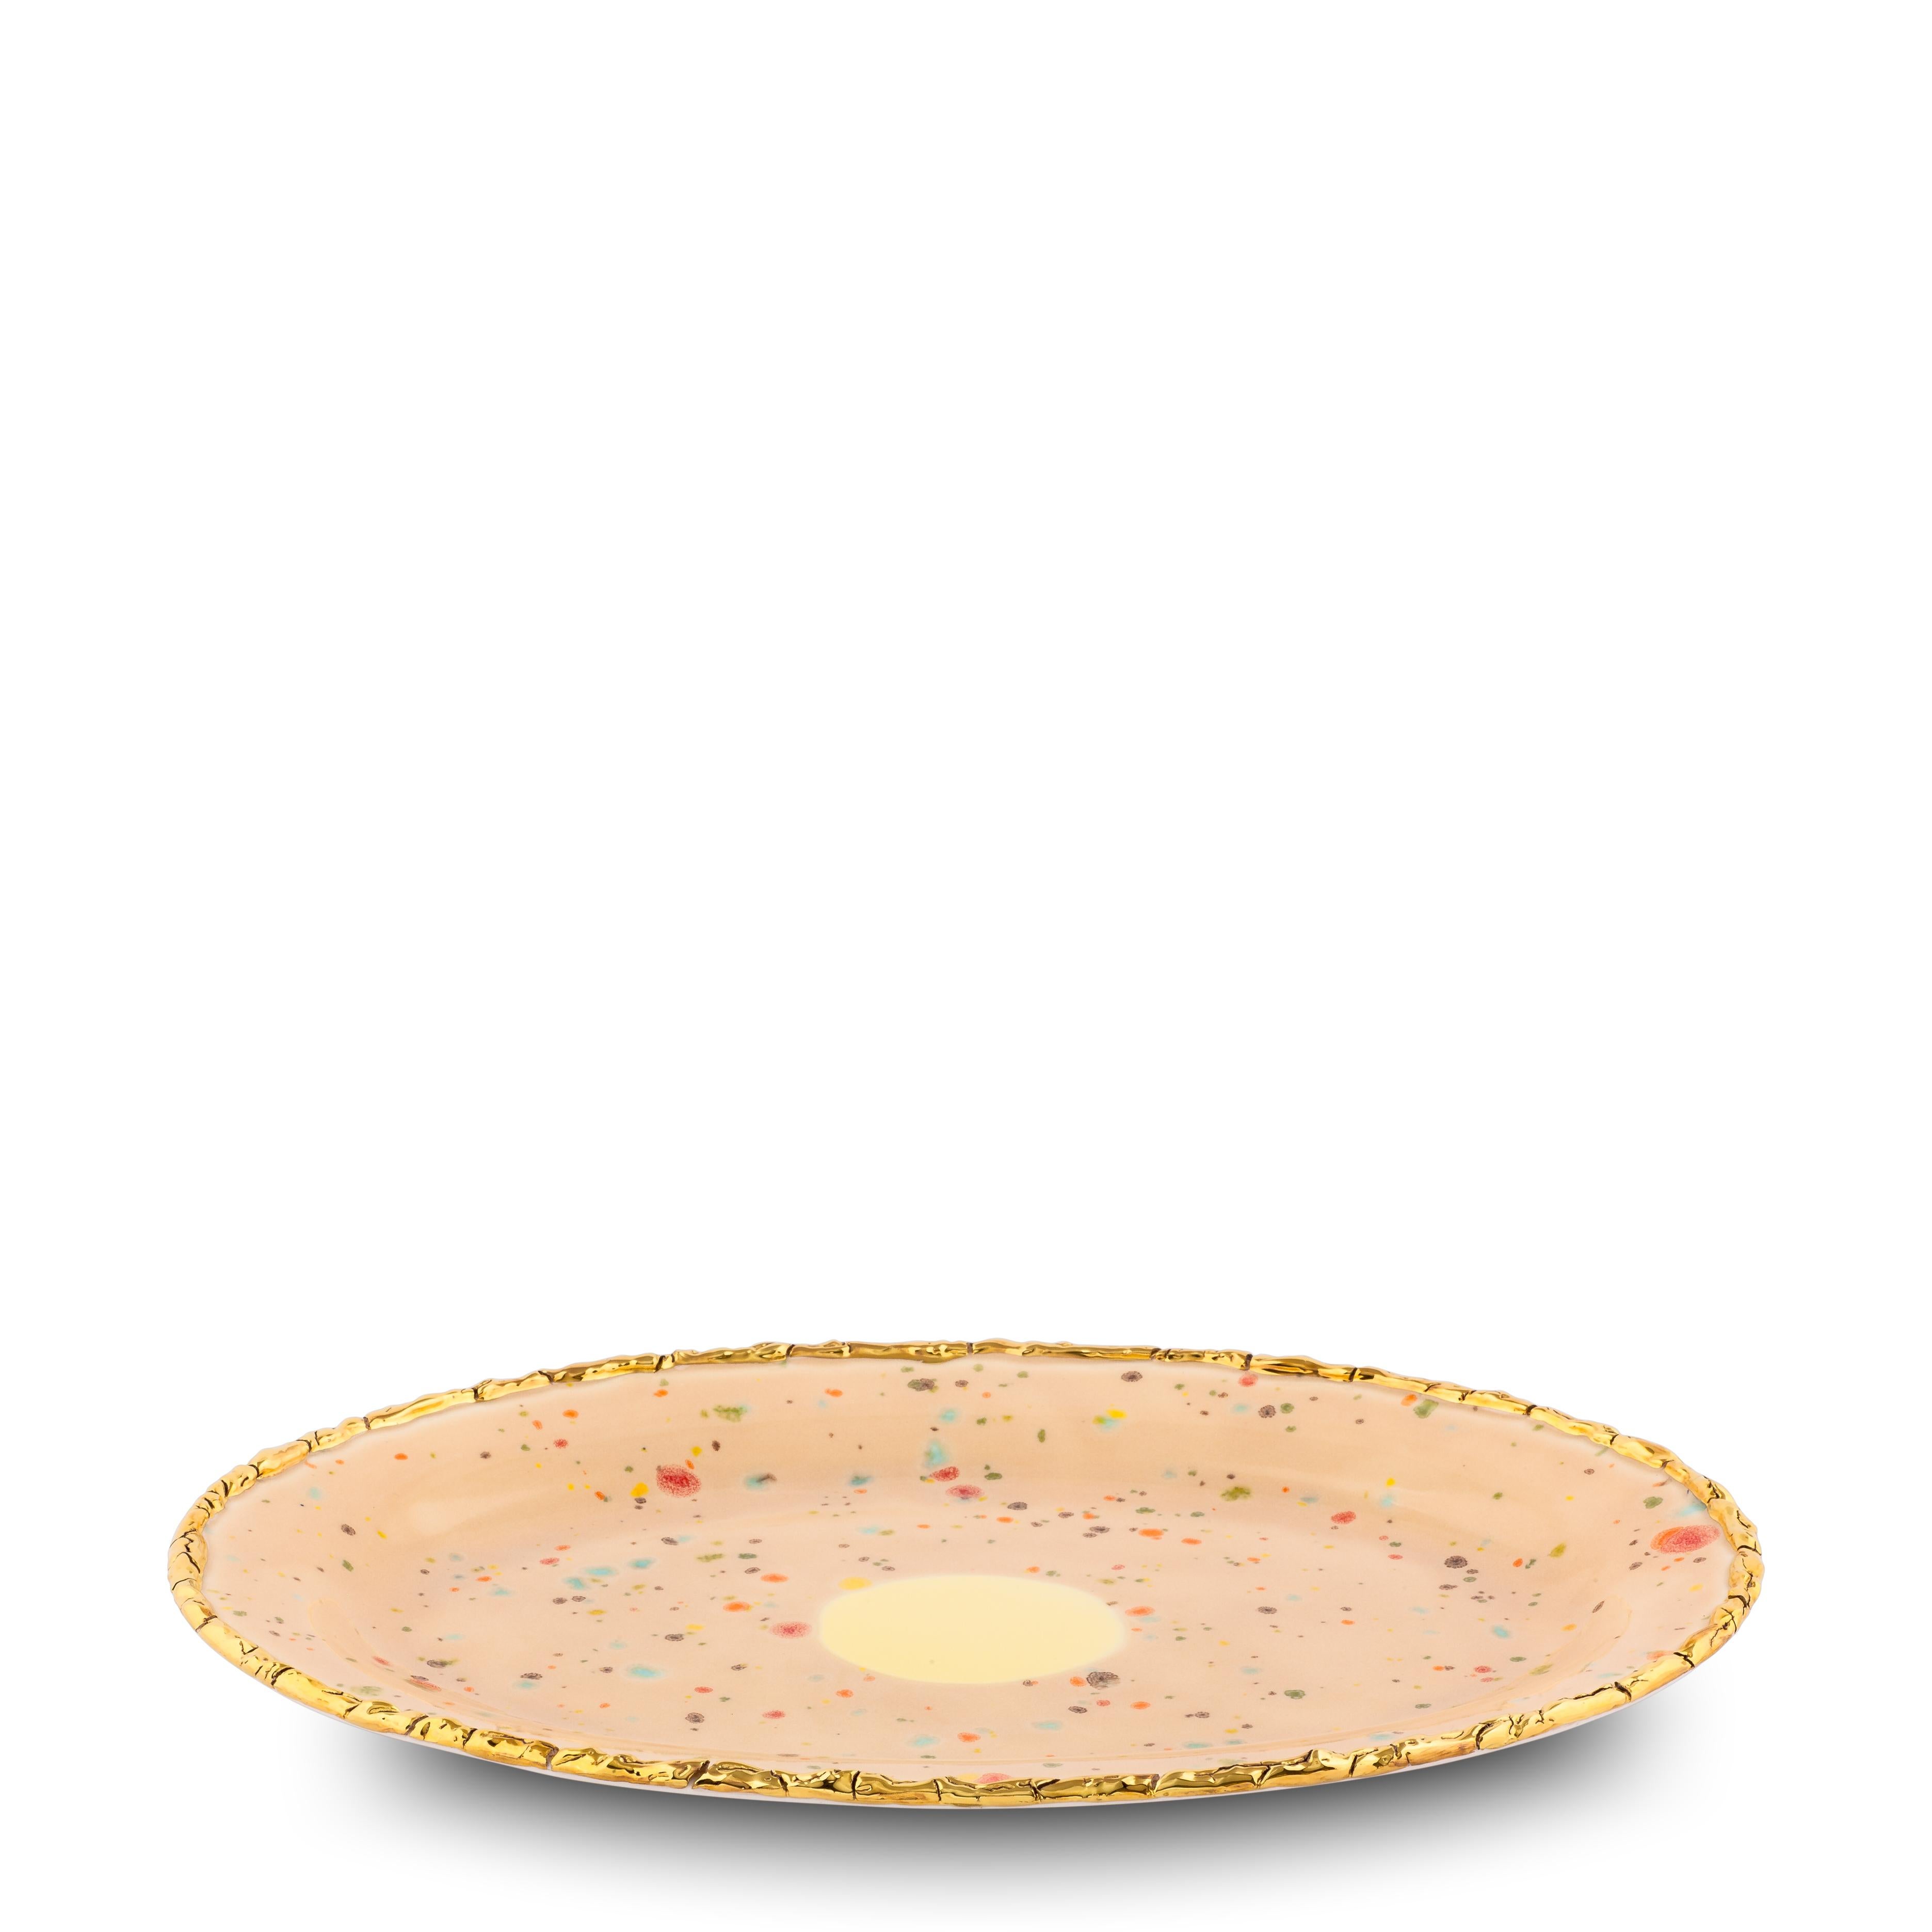 Handcrafted in Italy from the finest porcelain, this Craquelé edge oval rim platter from the Chestnut Collection has a unique golden crackled rim emphasizing the warm sandy surface covered with little multicolor dots and the bright yellow splotch at